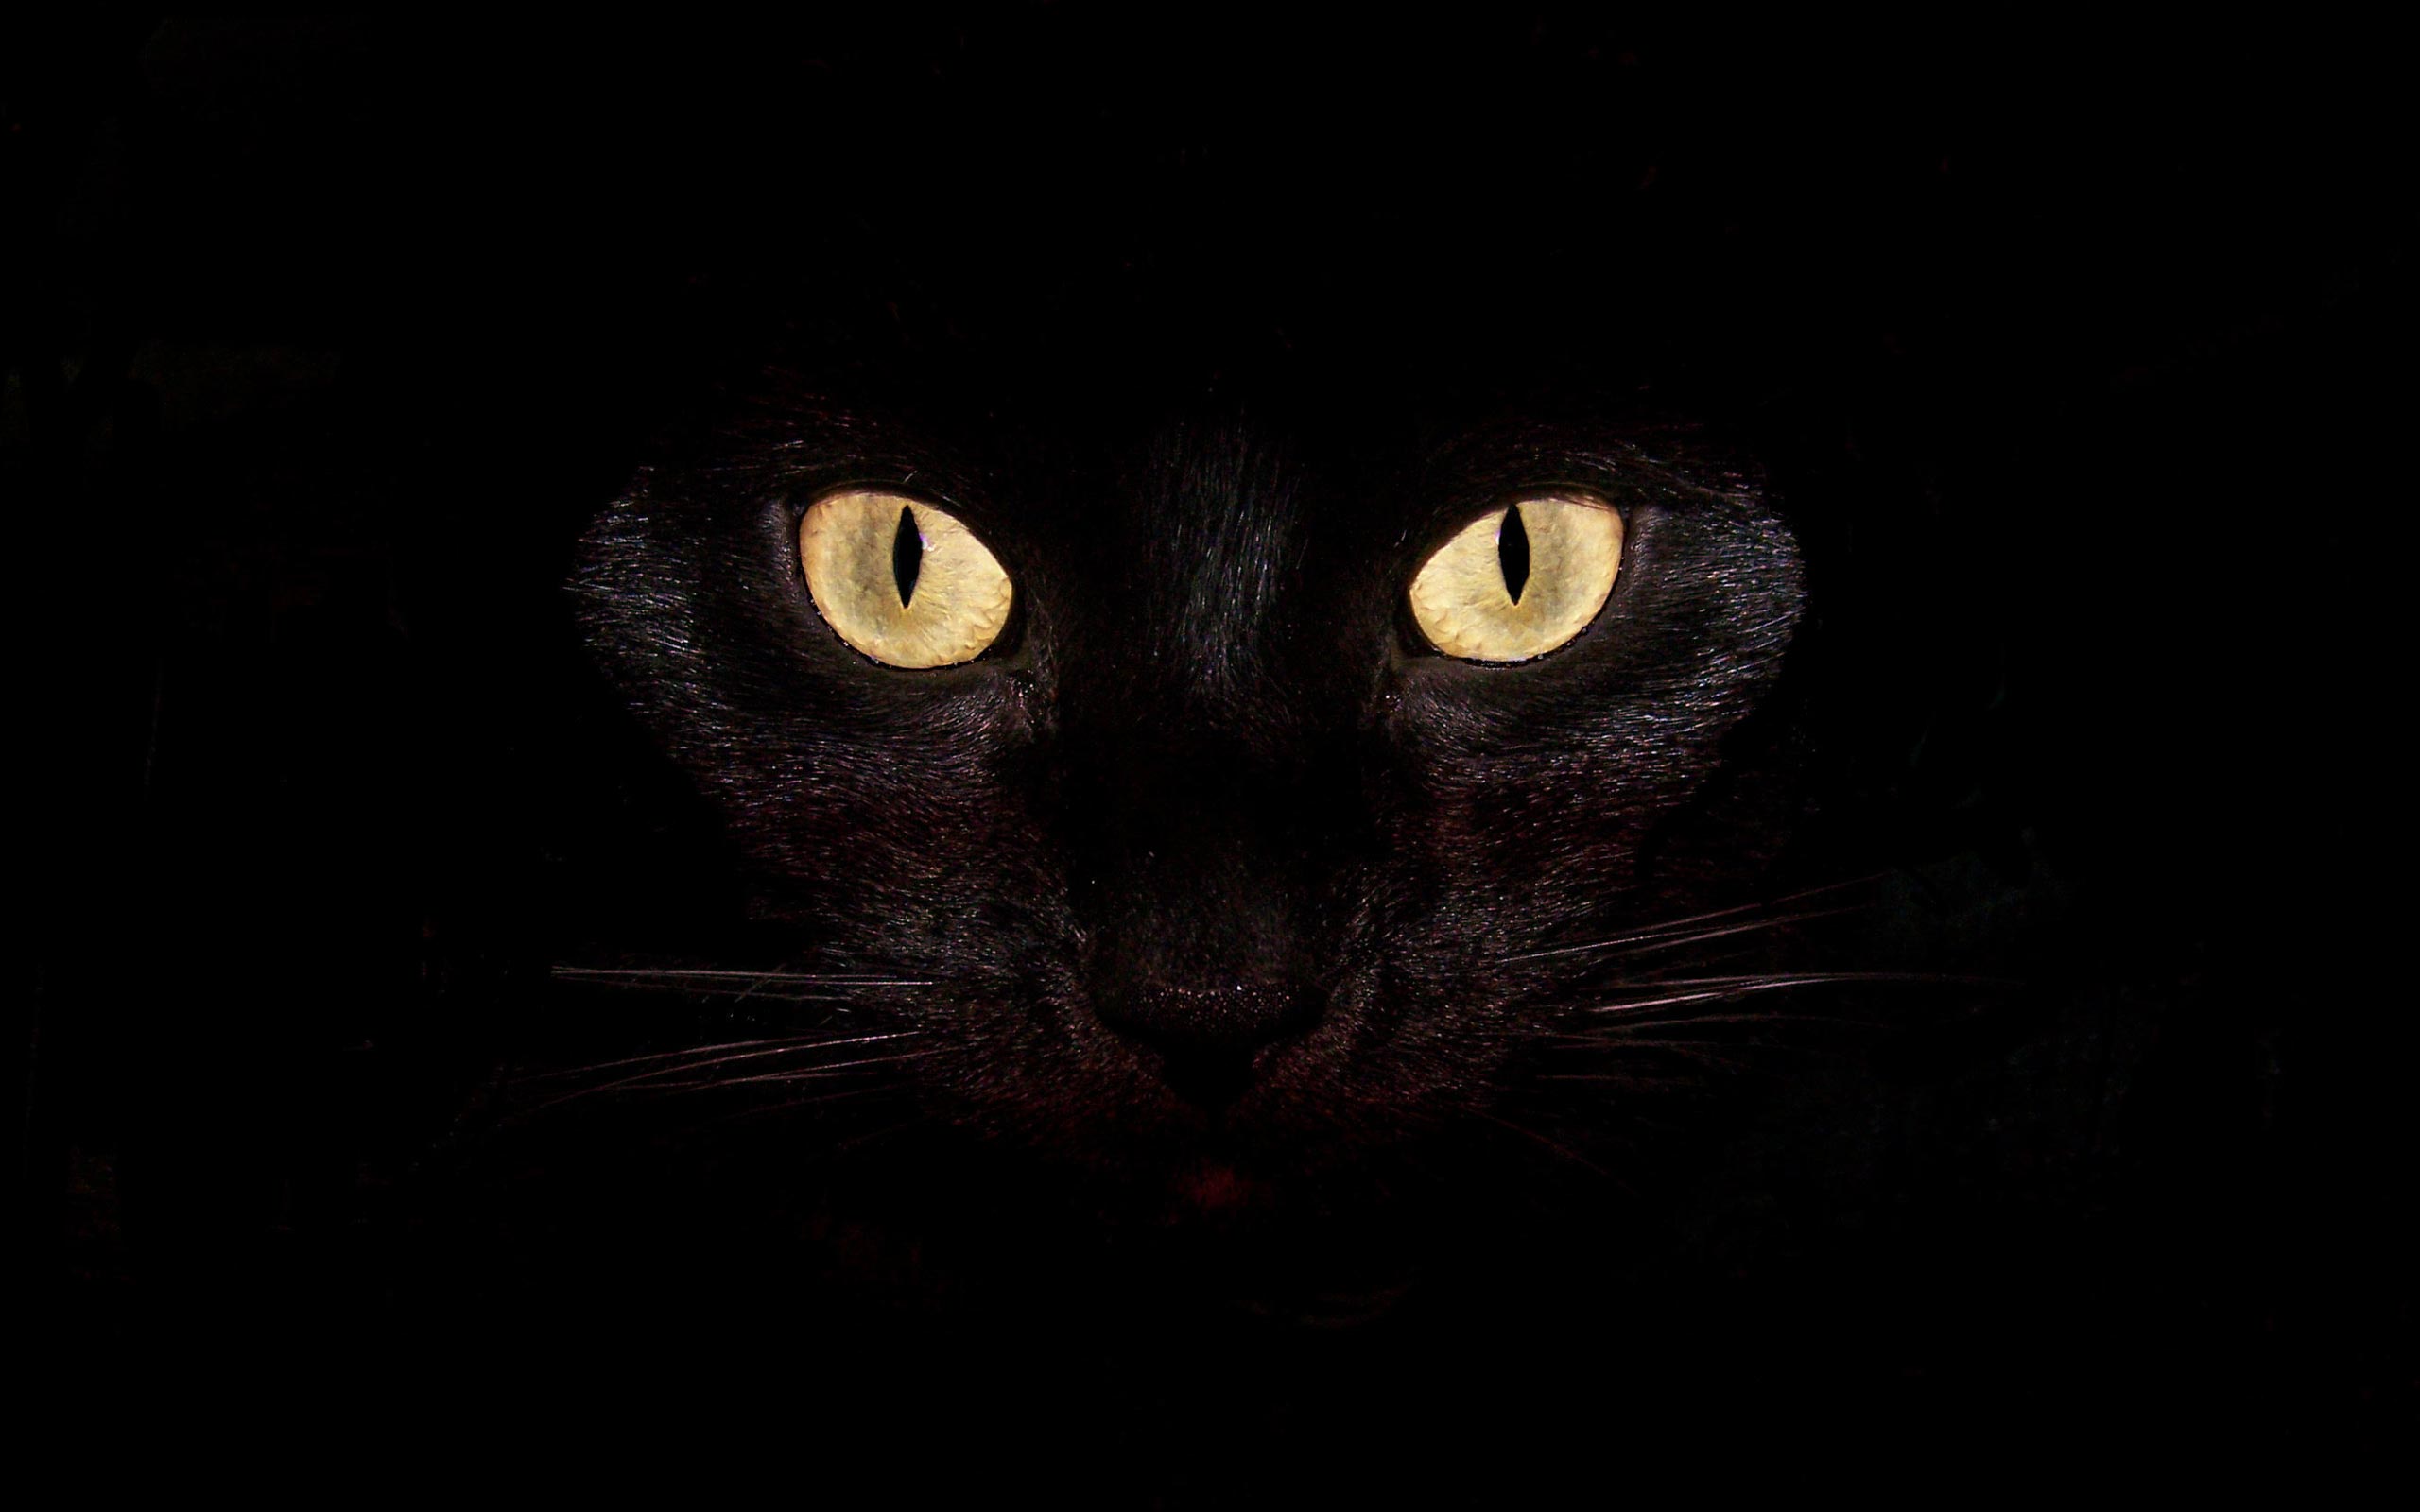  Black cat backgrounds Wallpaper and make this wallpaper for your 2560x1600